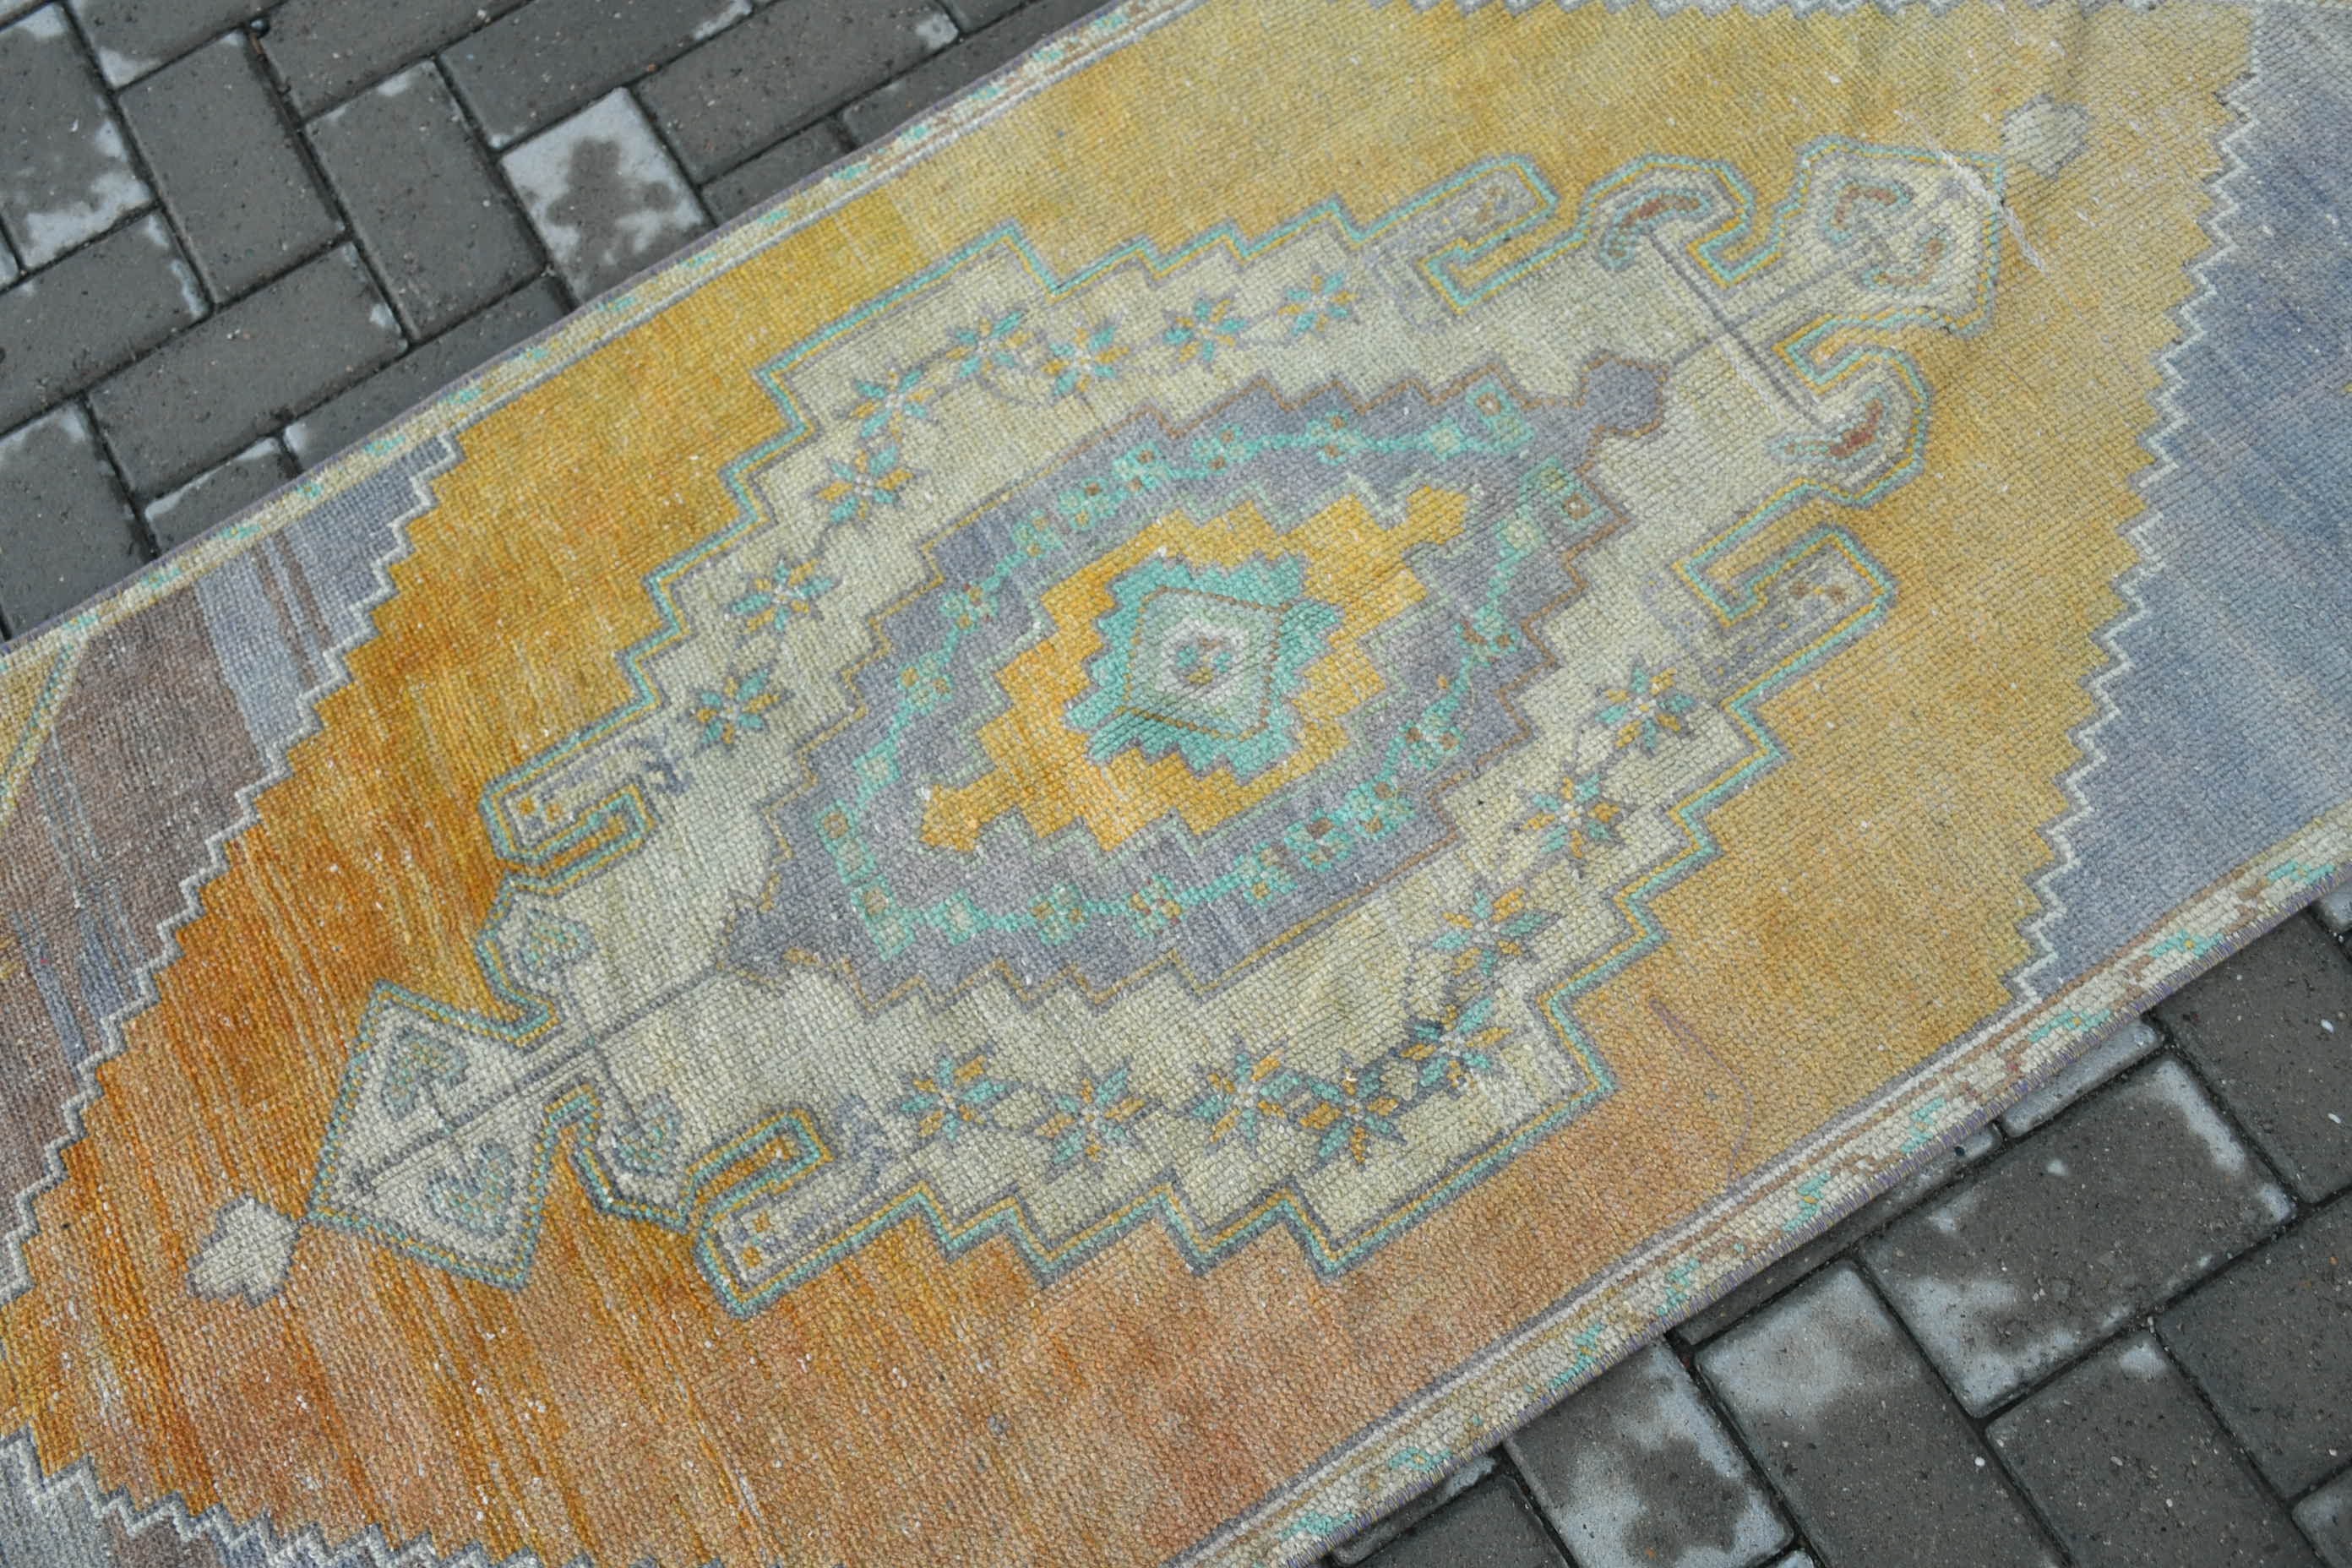 Bedroom Rug, Rugs for Bedroom, Antique Rug, Turkish Rugs, Vintage Rug, Yellow Oriental Rug, Kitchen Rug, Entry Rug, 2.8x5.4 ft Accent Rugs